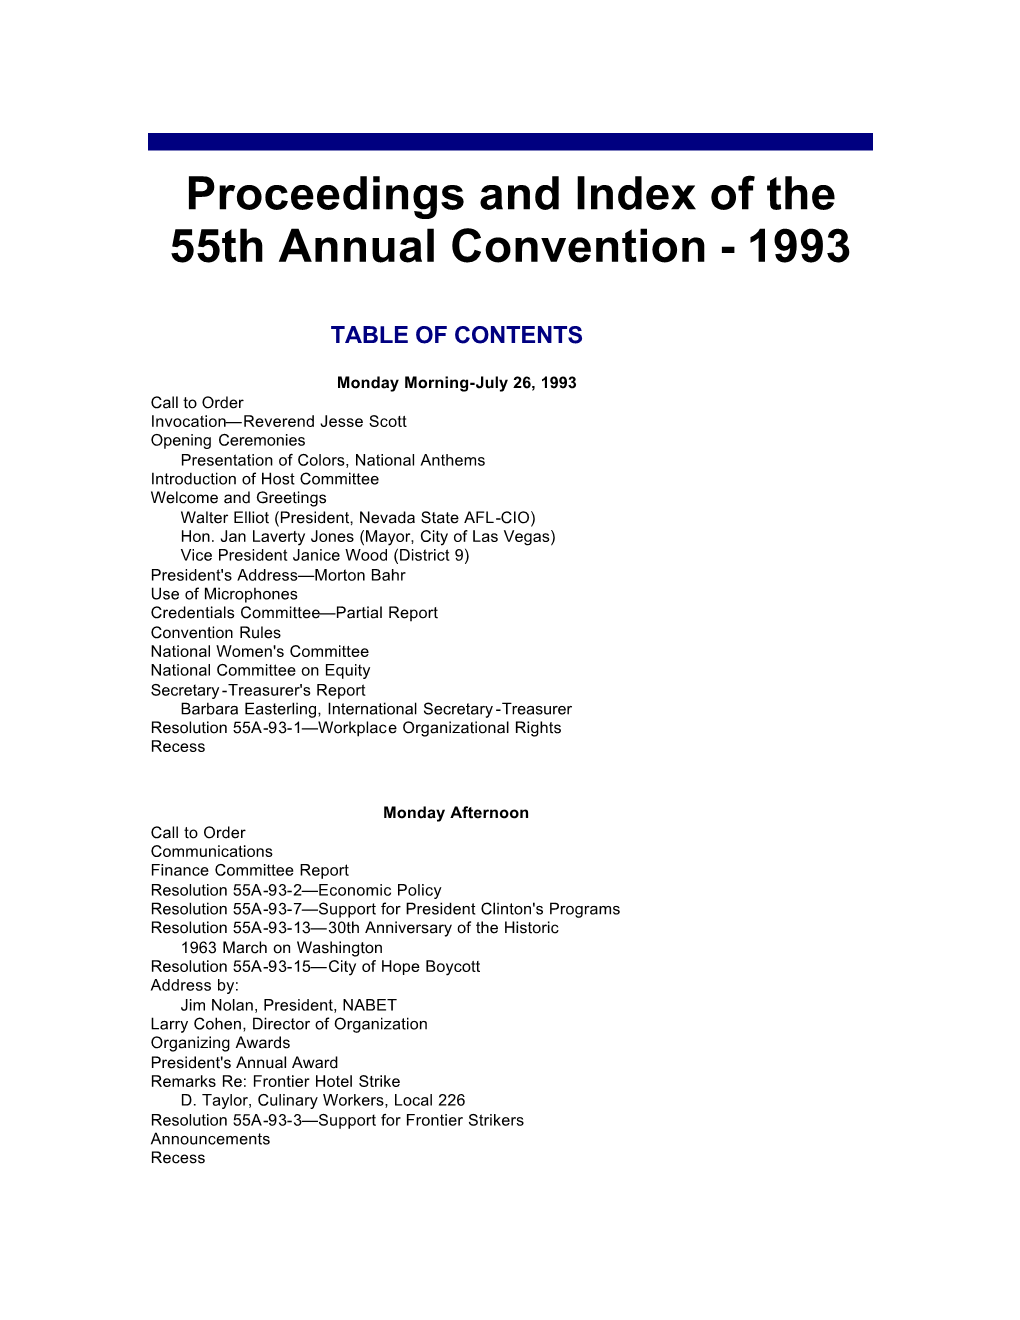 Proceedings and Index of the 55Th Annual Convention - 1993